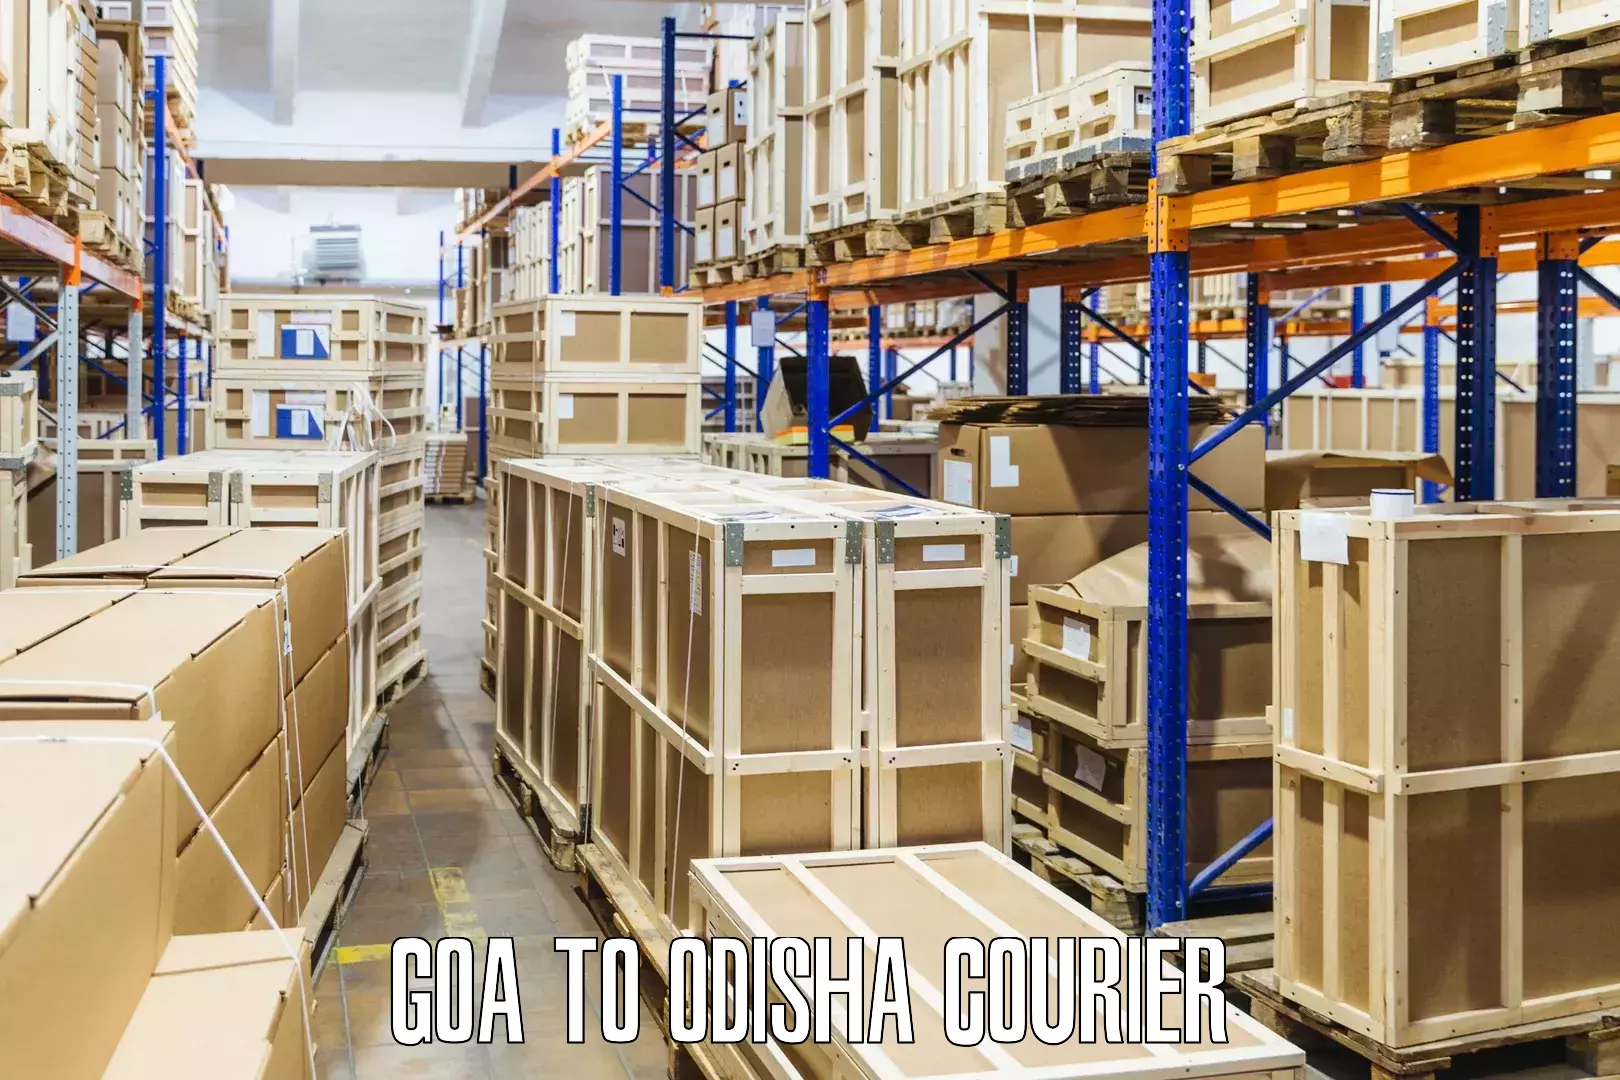 User-friendly courier app Goa to Asika